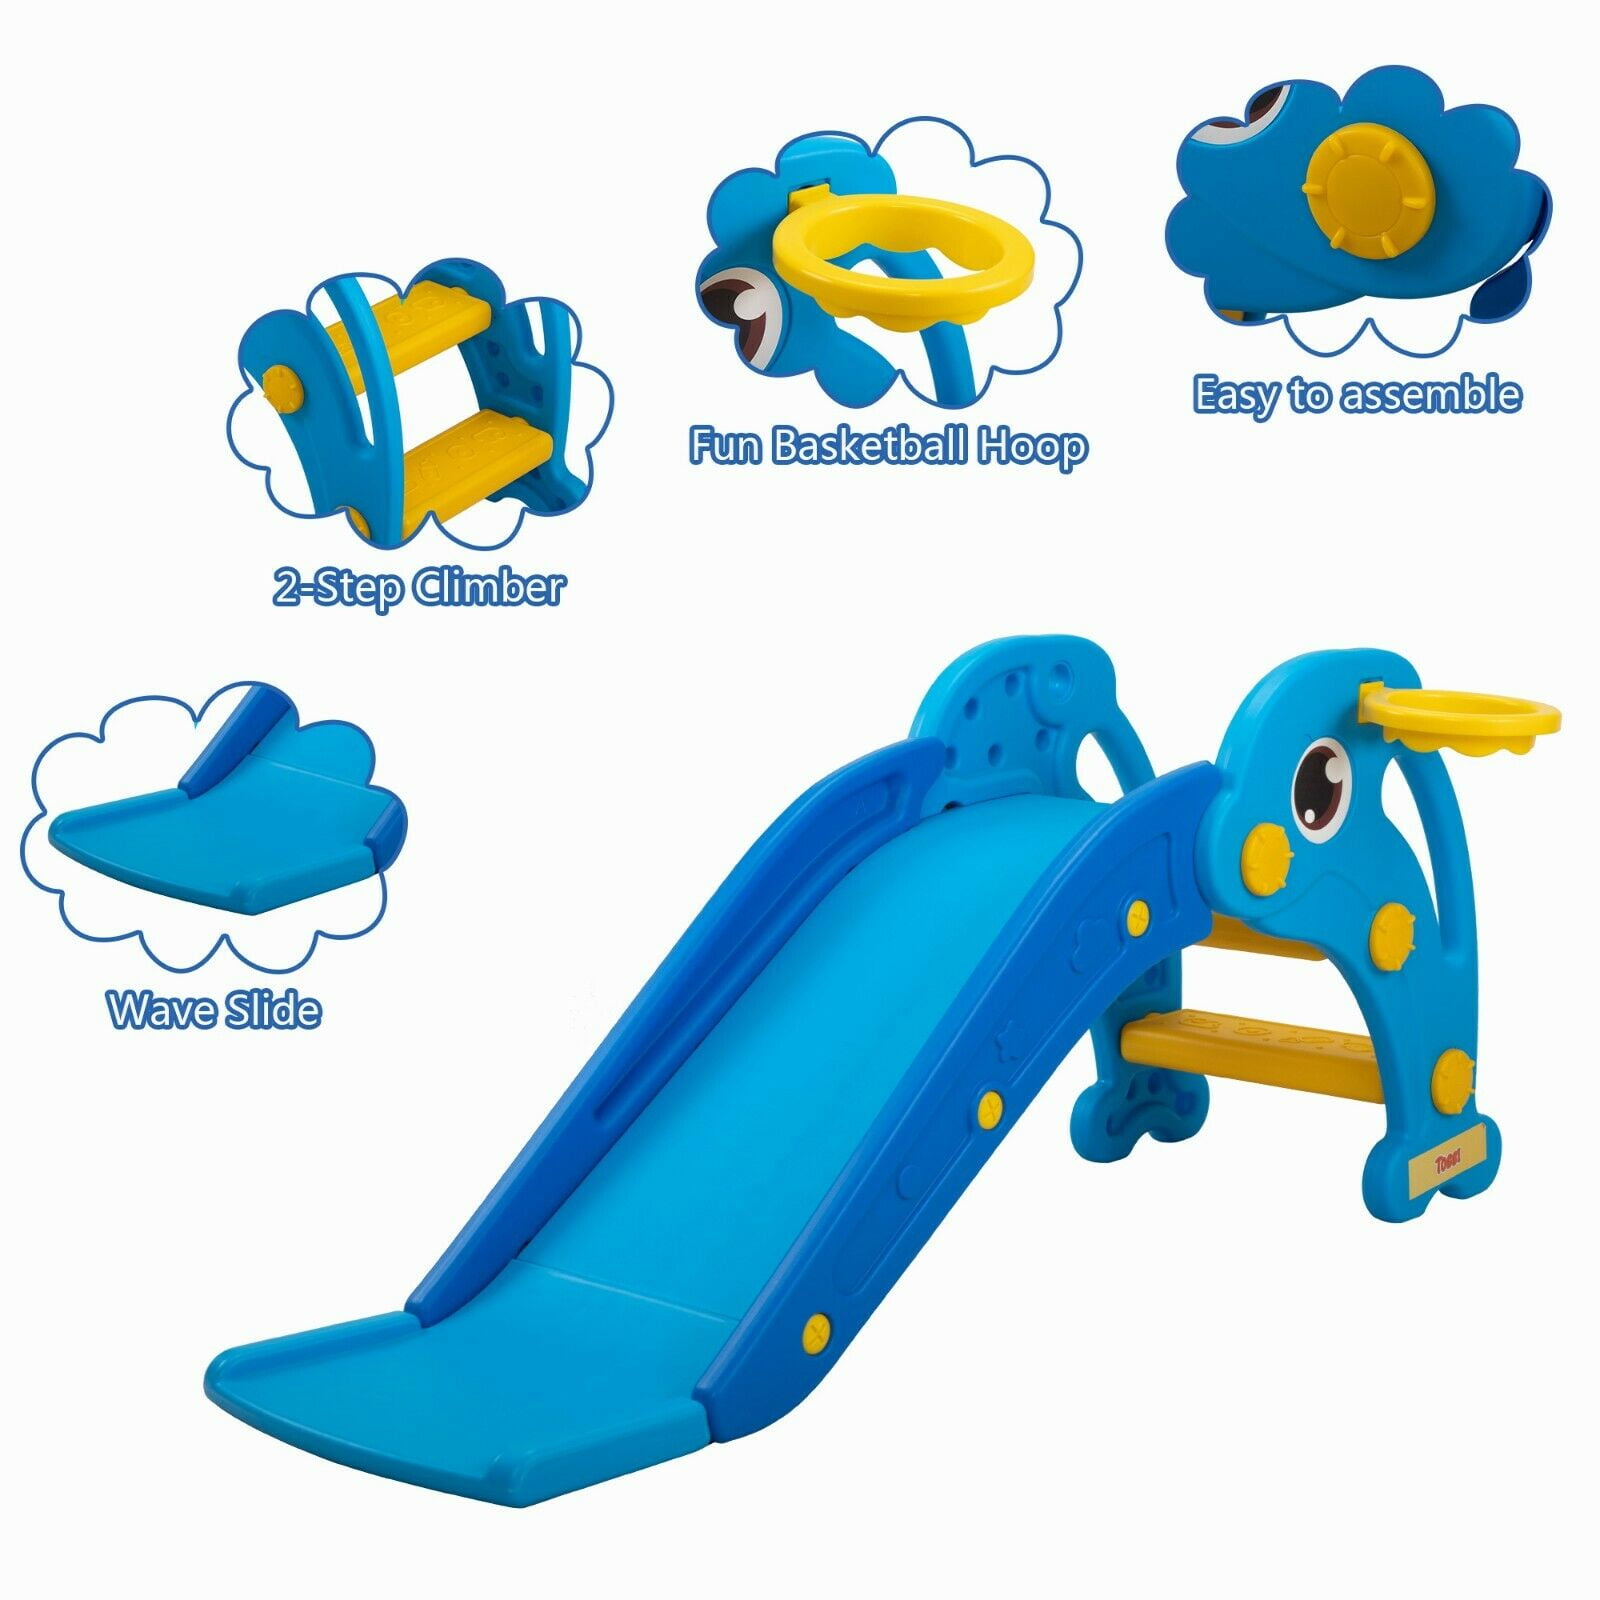 3 in 1 Kids Climber and Slide, Toddler Play Set with Basketball